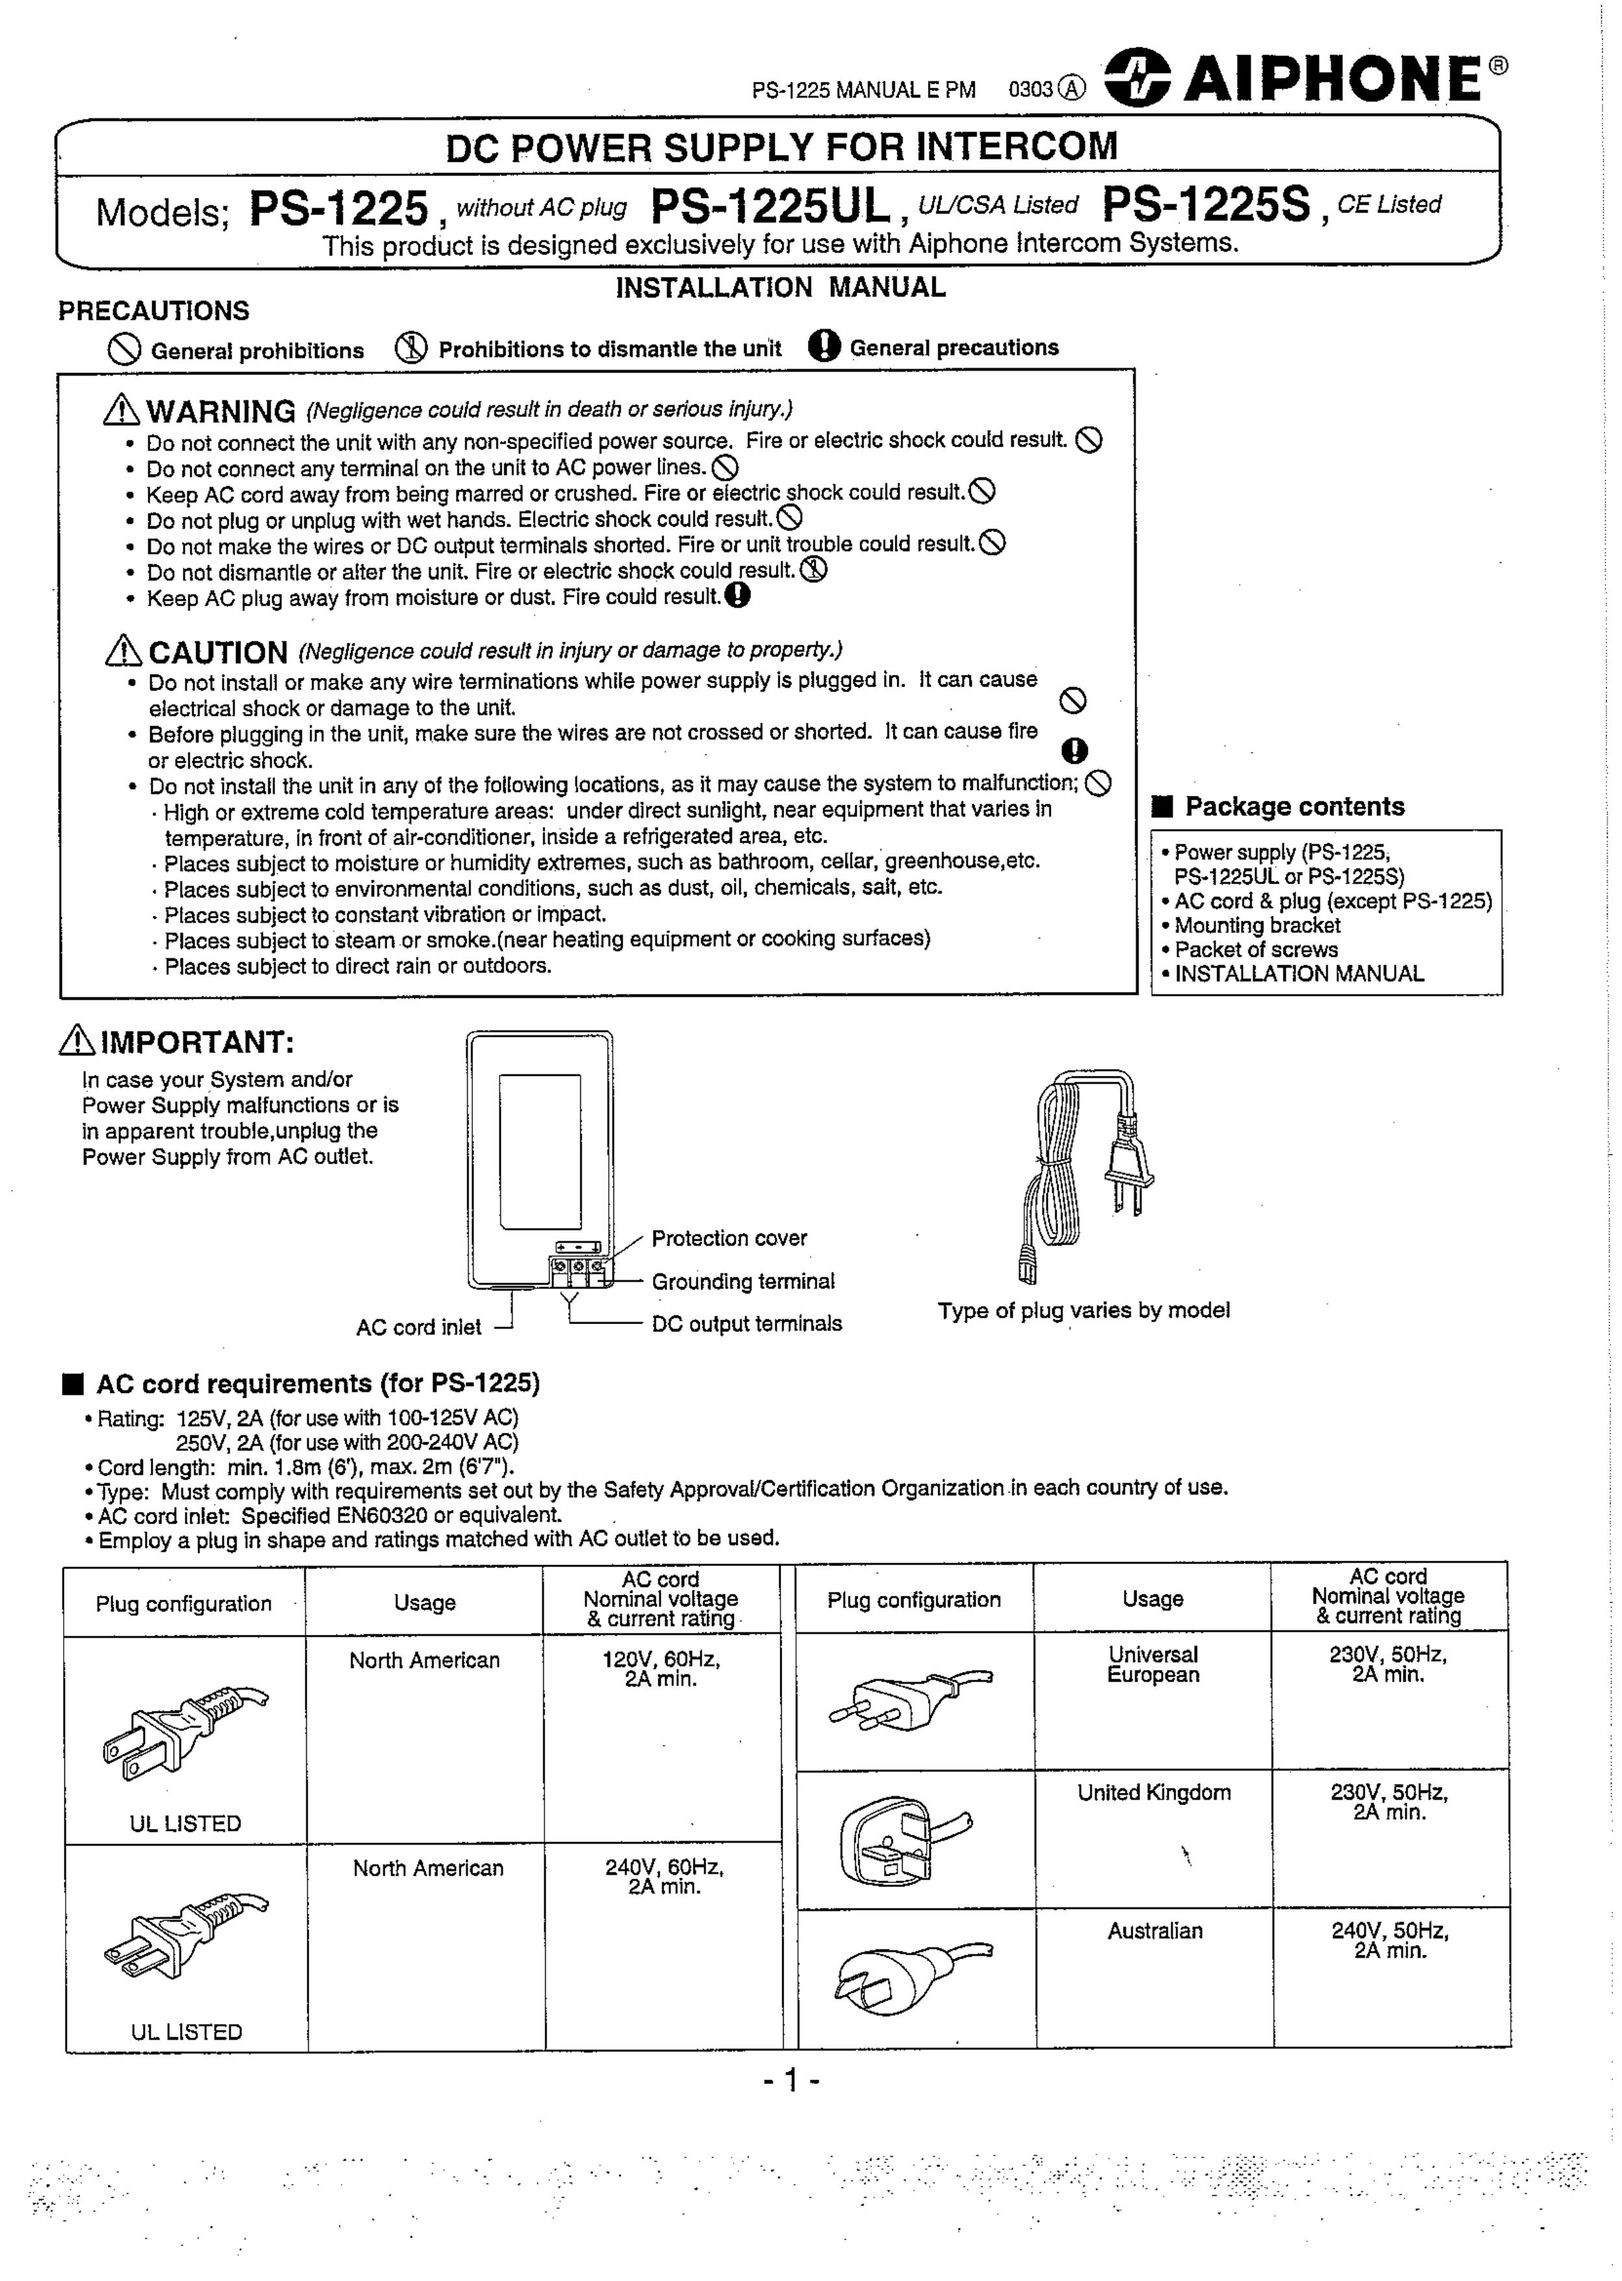 Aiphone PS-1225 Power Supply User Manual